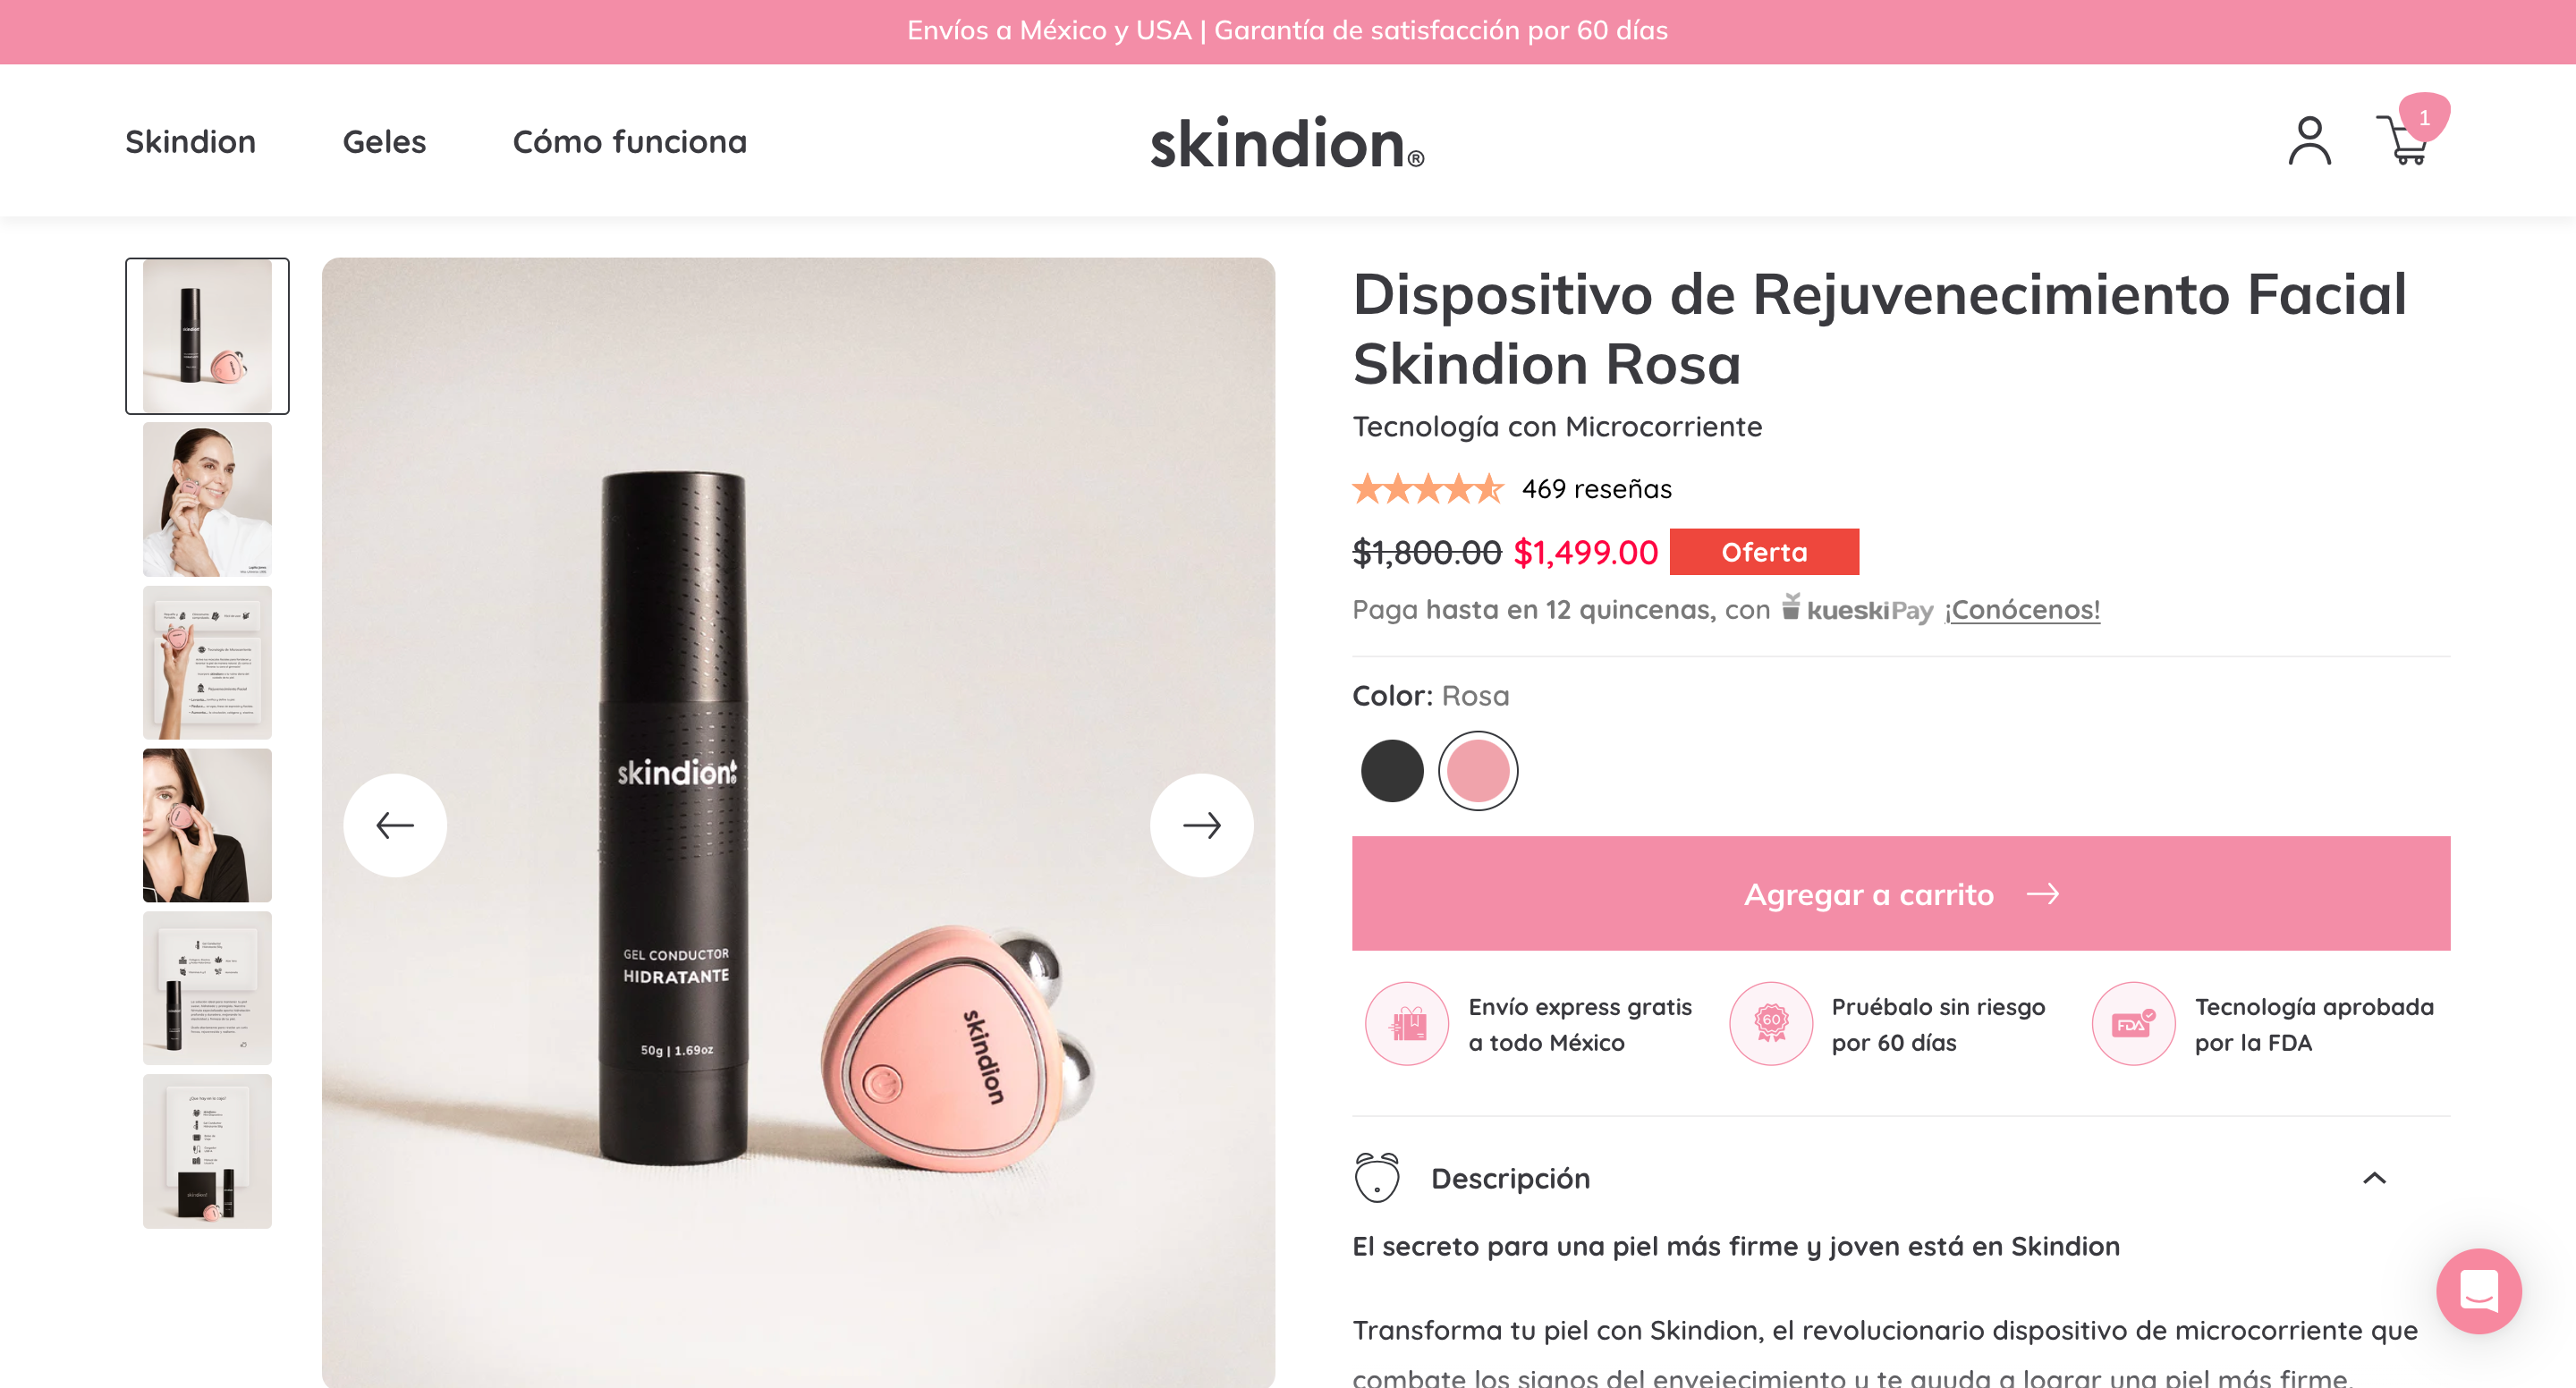 skindion product page